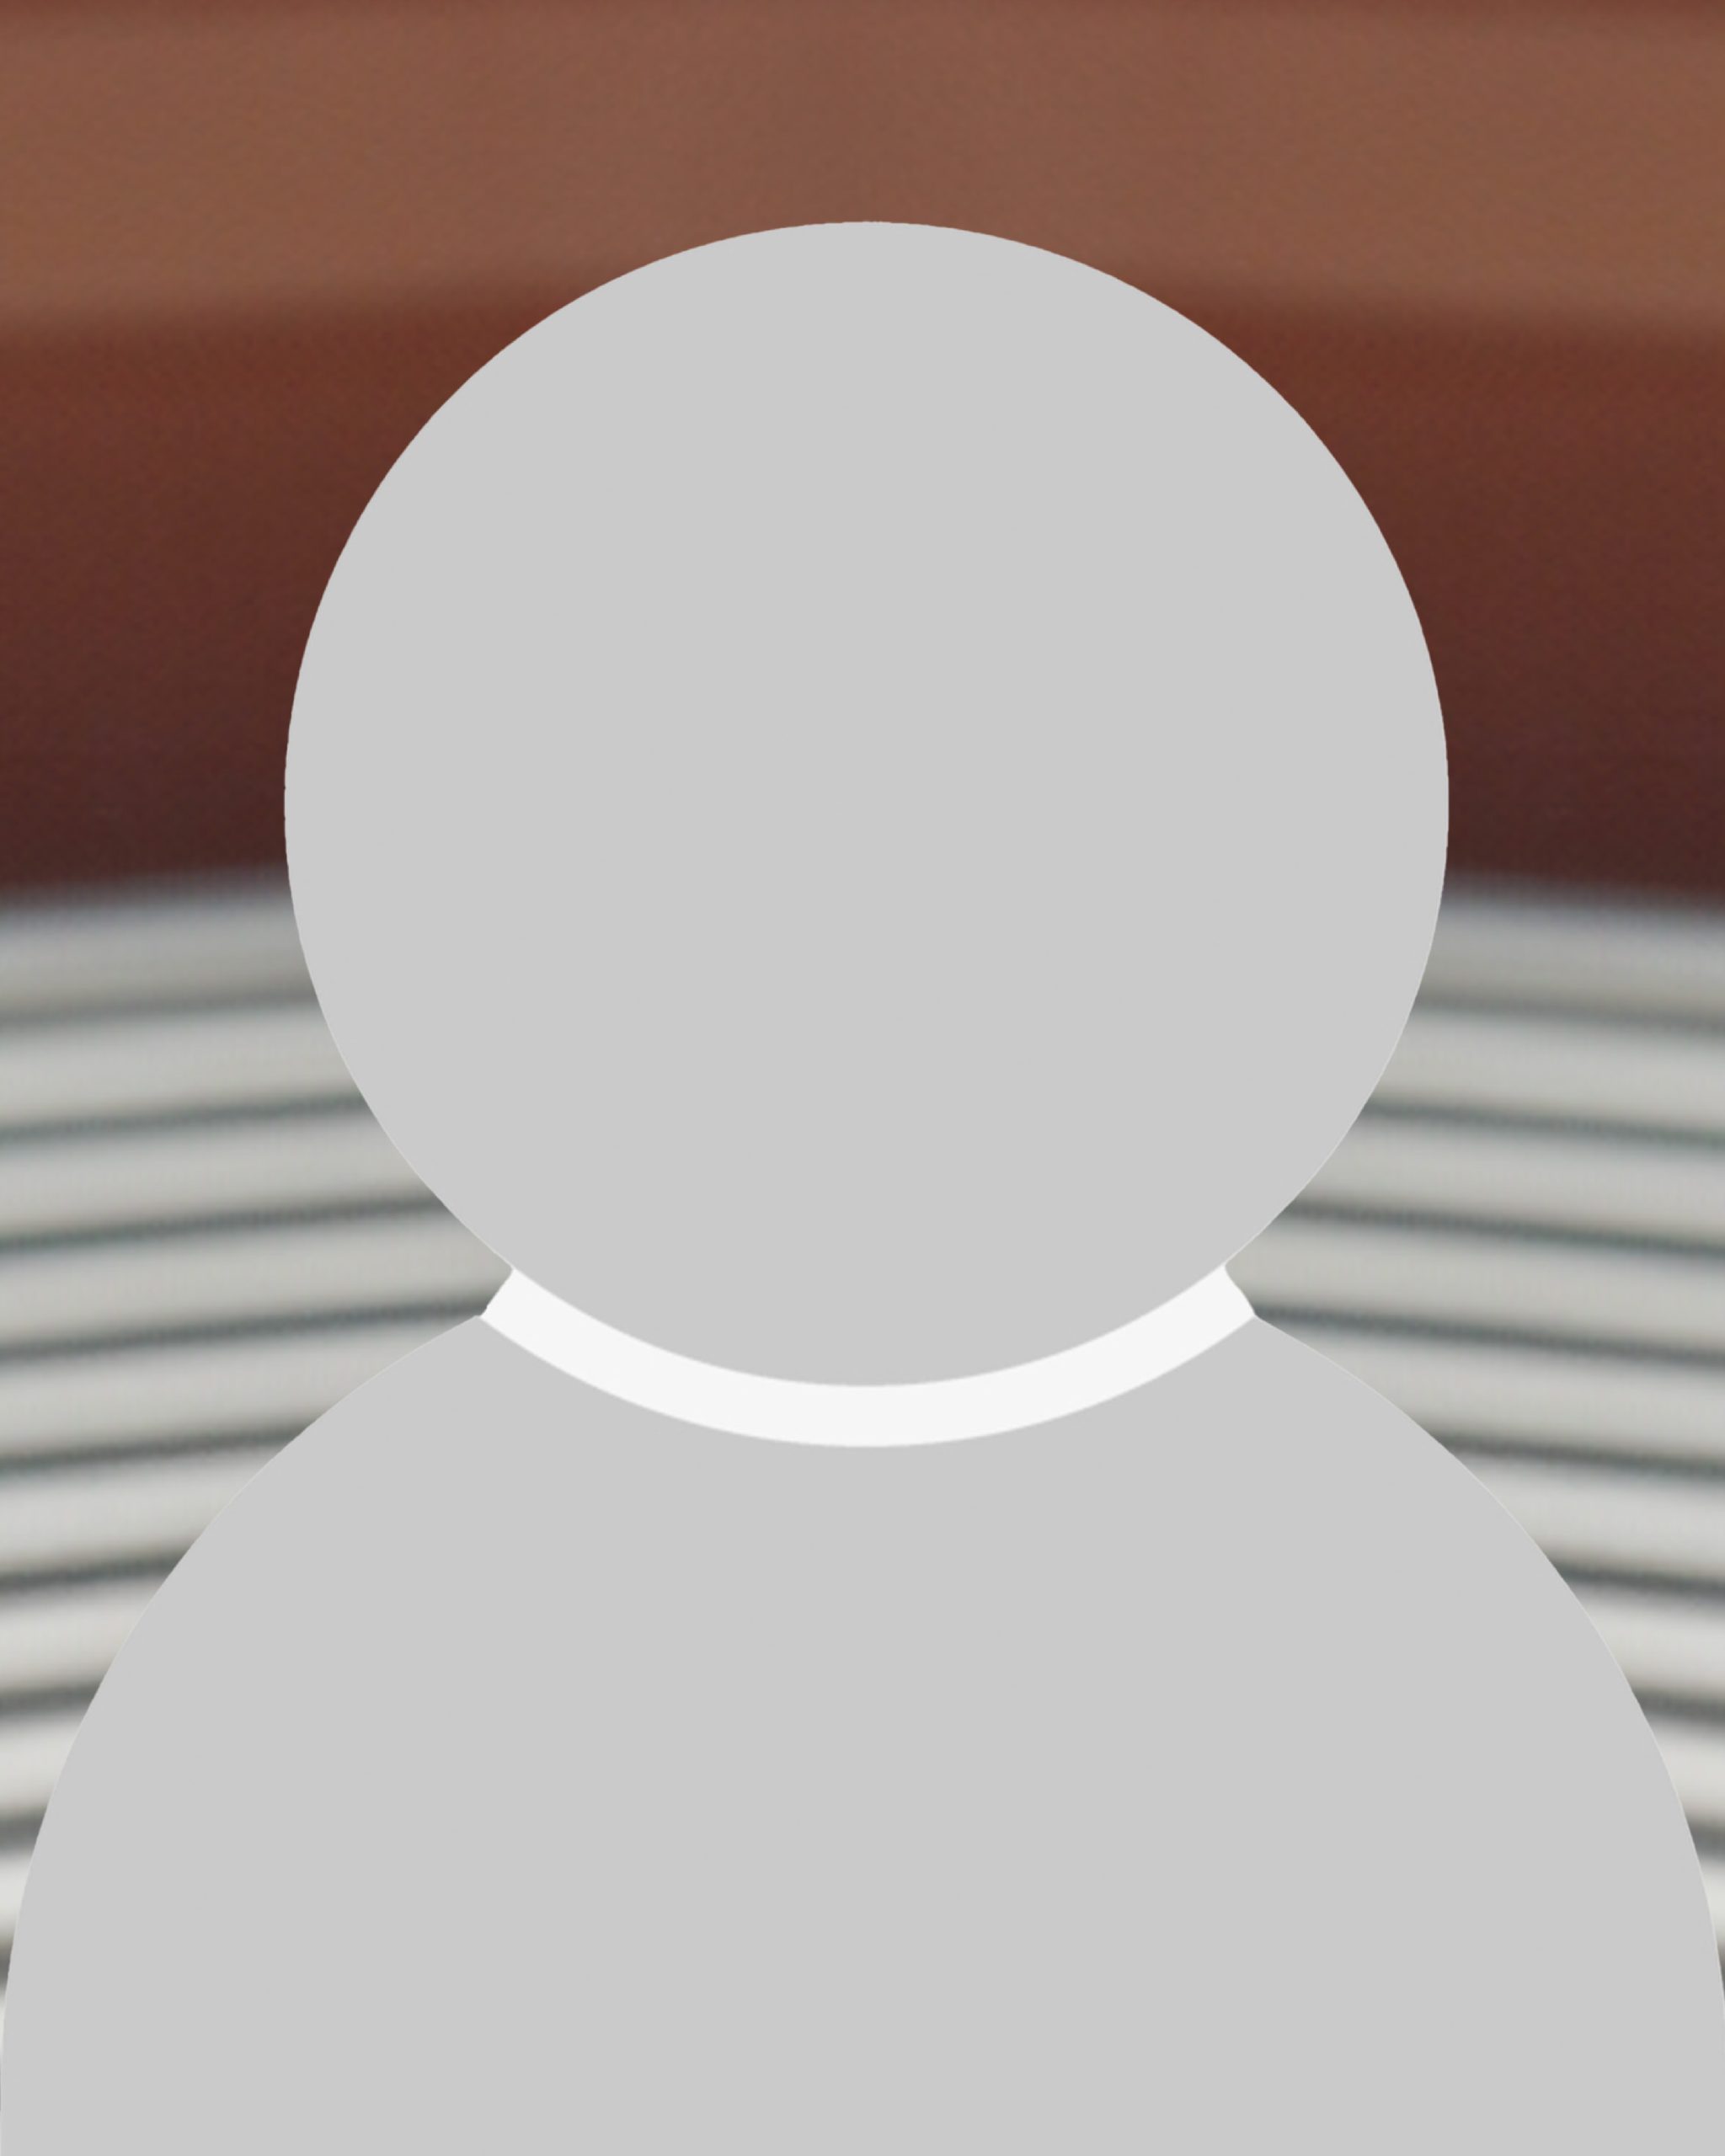 Image with placeholder graphic representing a person, featuring a simple grey silhouette with no distinguishing features, against an indistinct background.